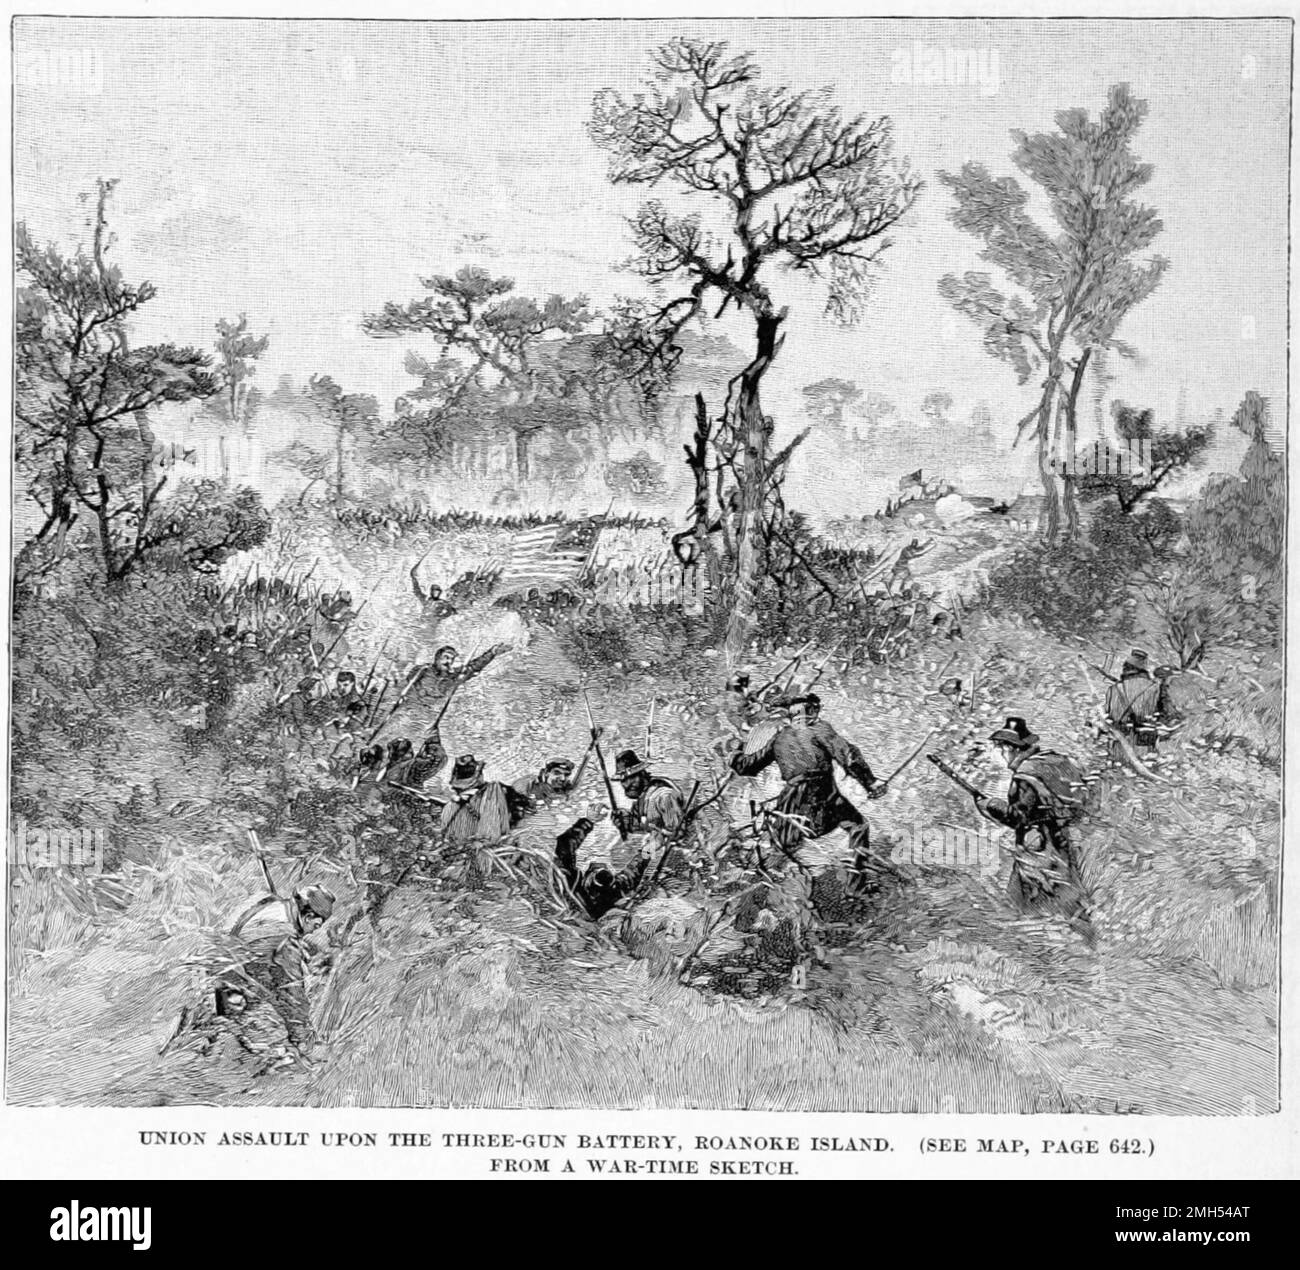 The Battle of Roanoke Island  was a battle in the American Civil War fought on 7-8th February 1862 in North Carolina. It was an Unionist amphibious assault under the command of Ambrose Burnside, and it was a Unionist victory as the Island was captured. The image depictsa bayonet charge of the New York Volunteers (Hawkins Zouaves) on the three gun battery Stock Photo